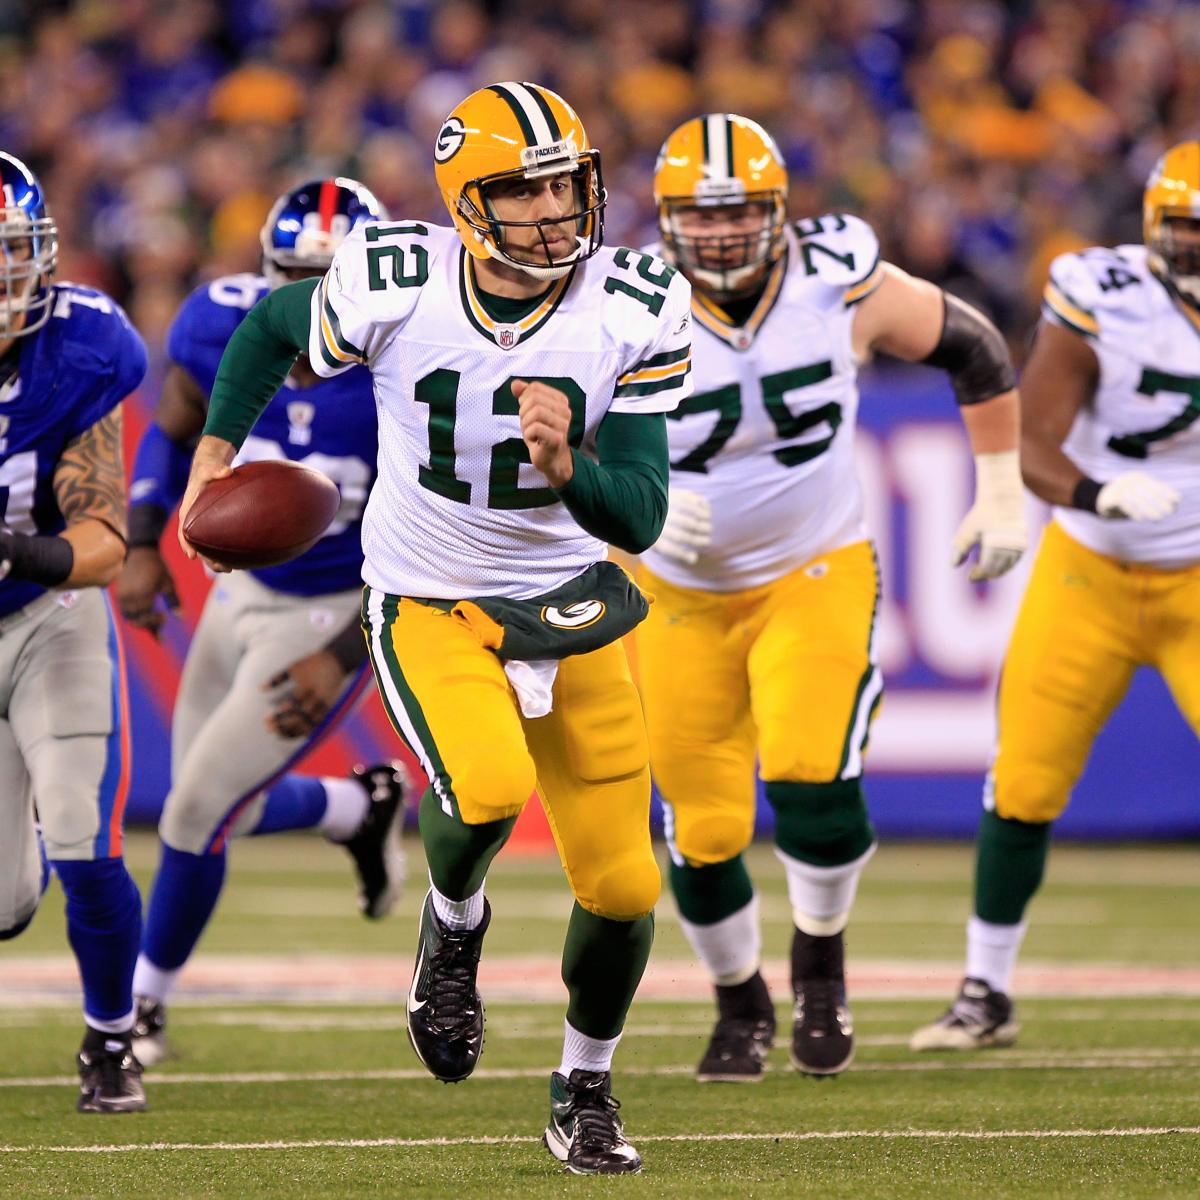 Giants vs. Packers Refreshed Aaron Rodgers Will Lead Green Bay to